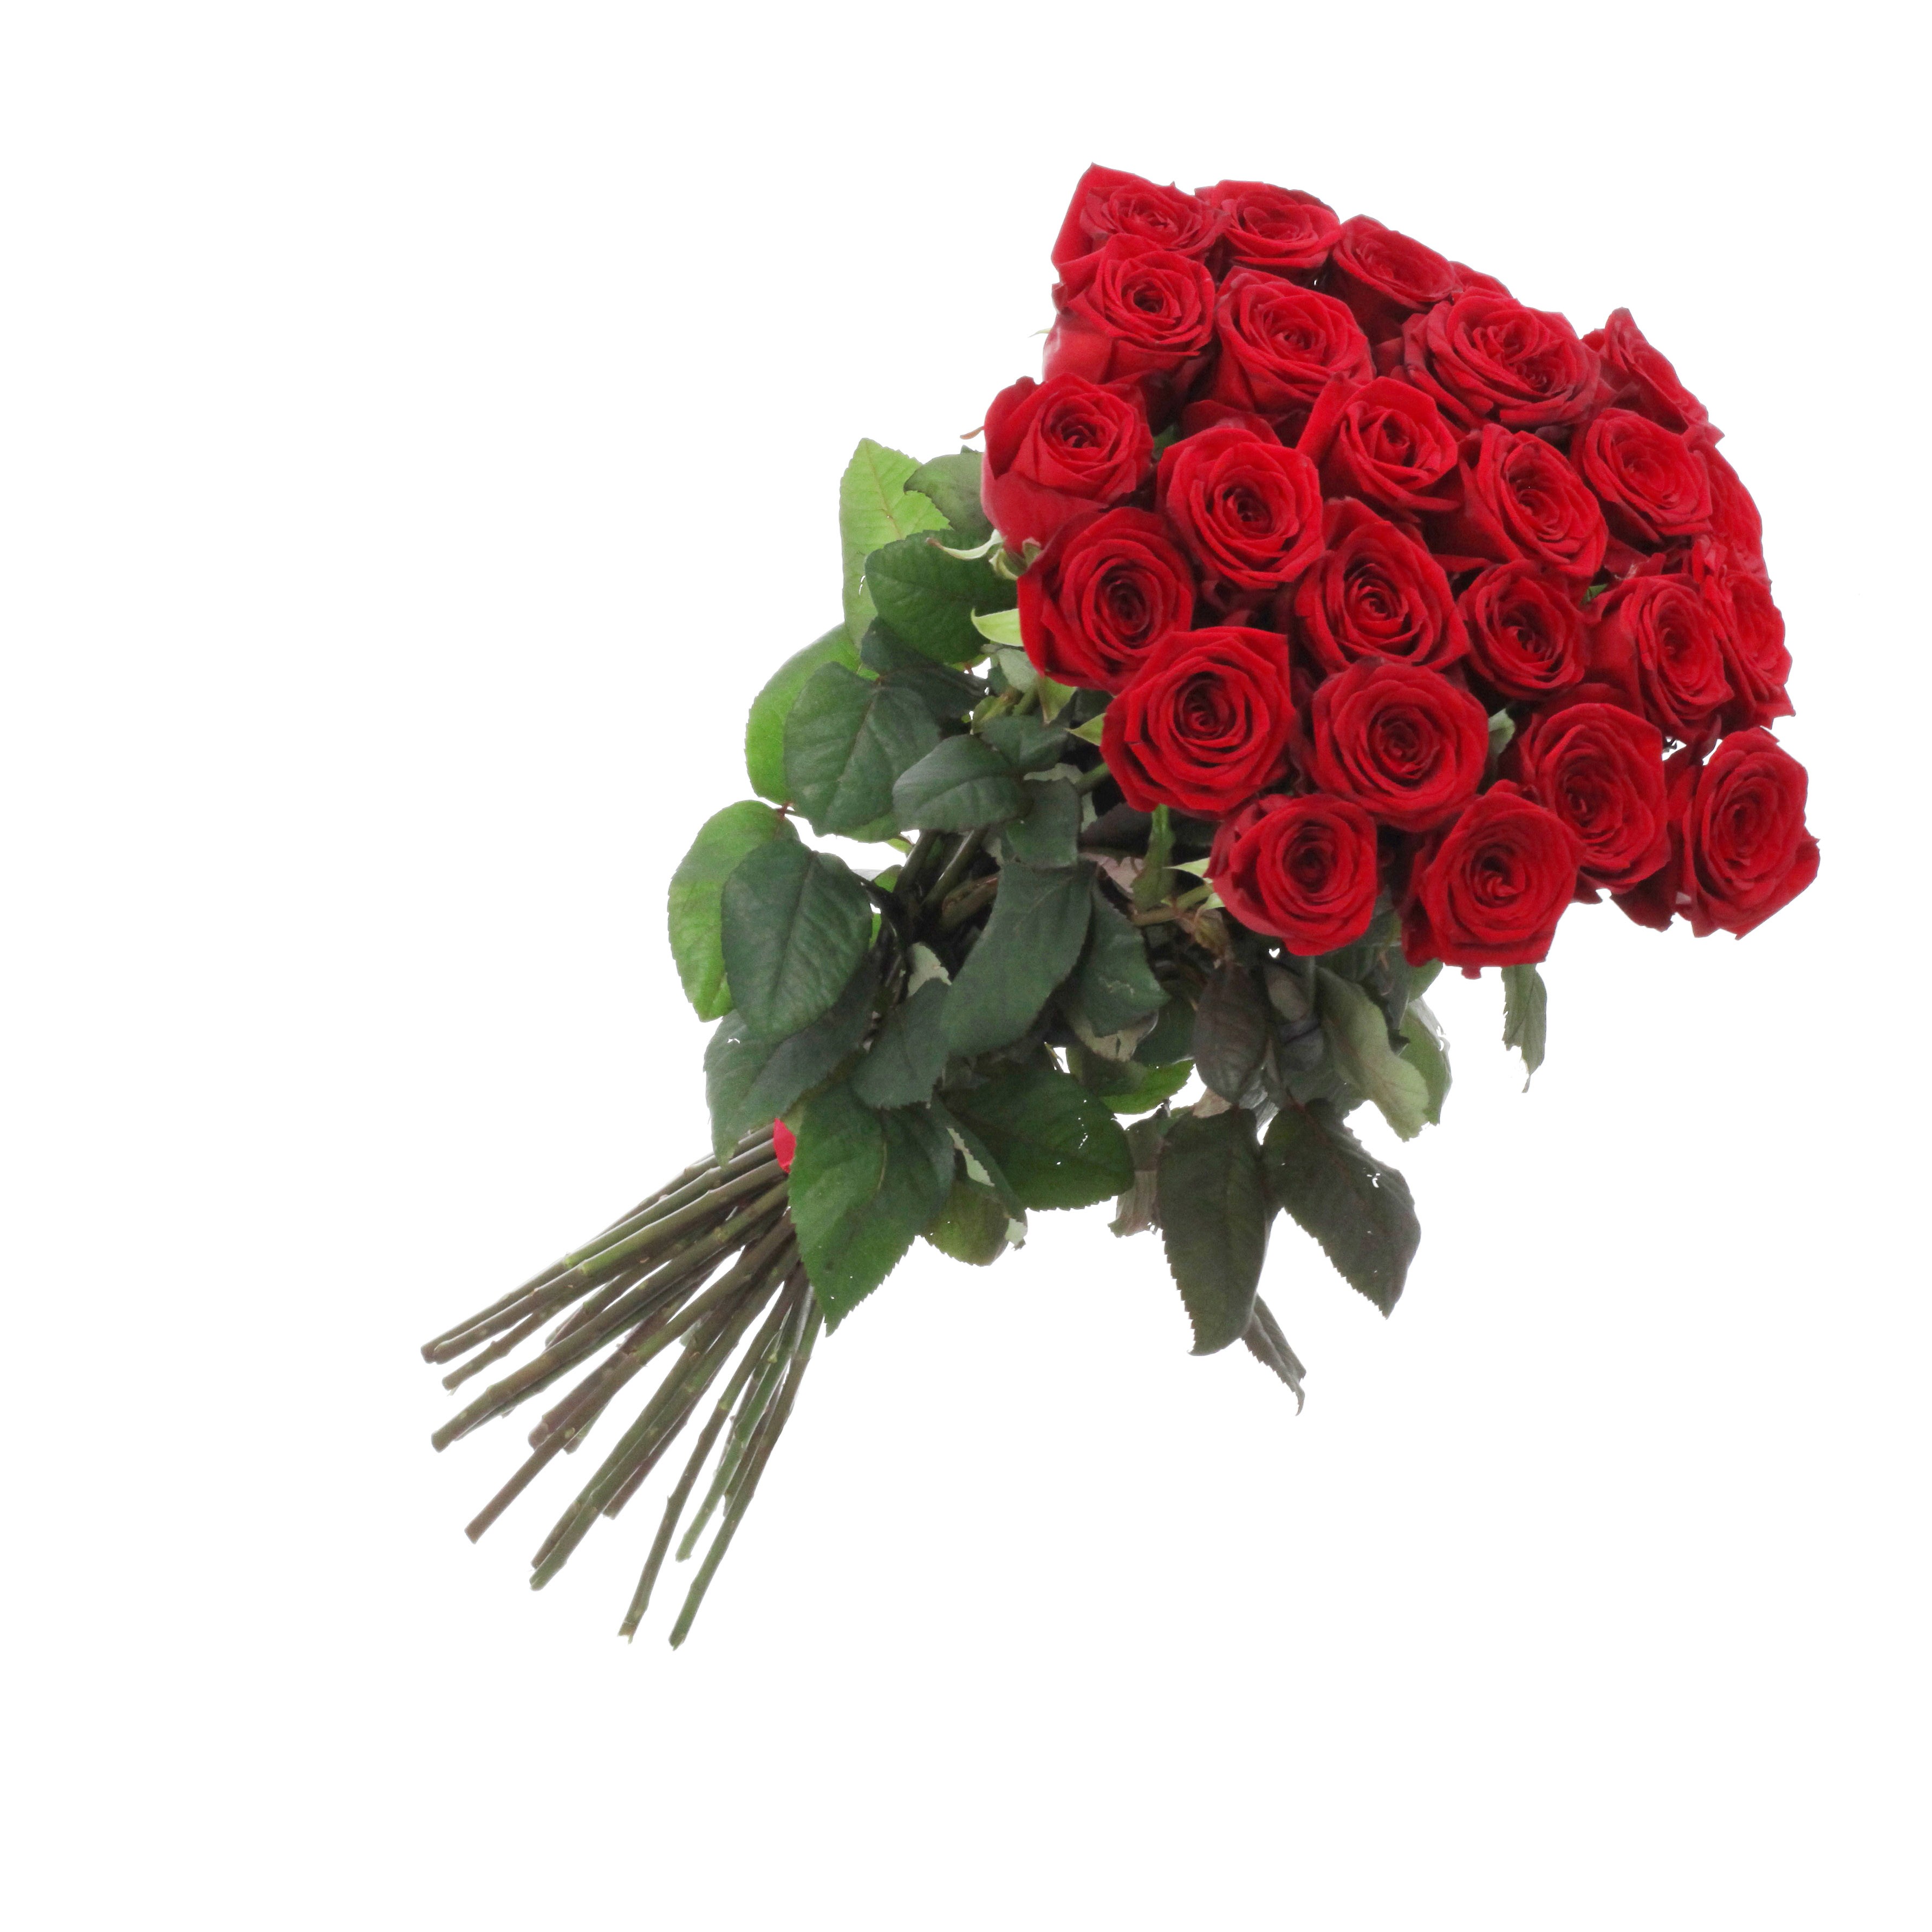 Bunch Of Roses Images : Red Roses Bouquet Italian Flora : Search more ...